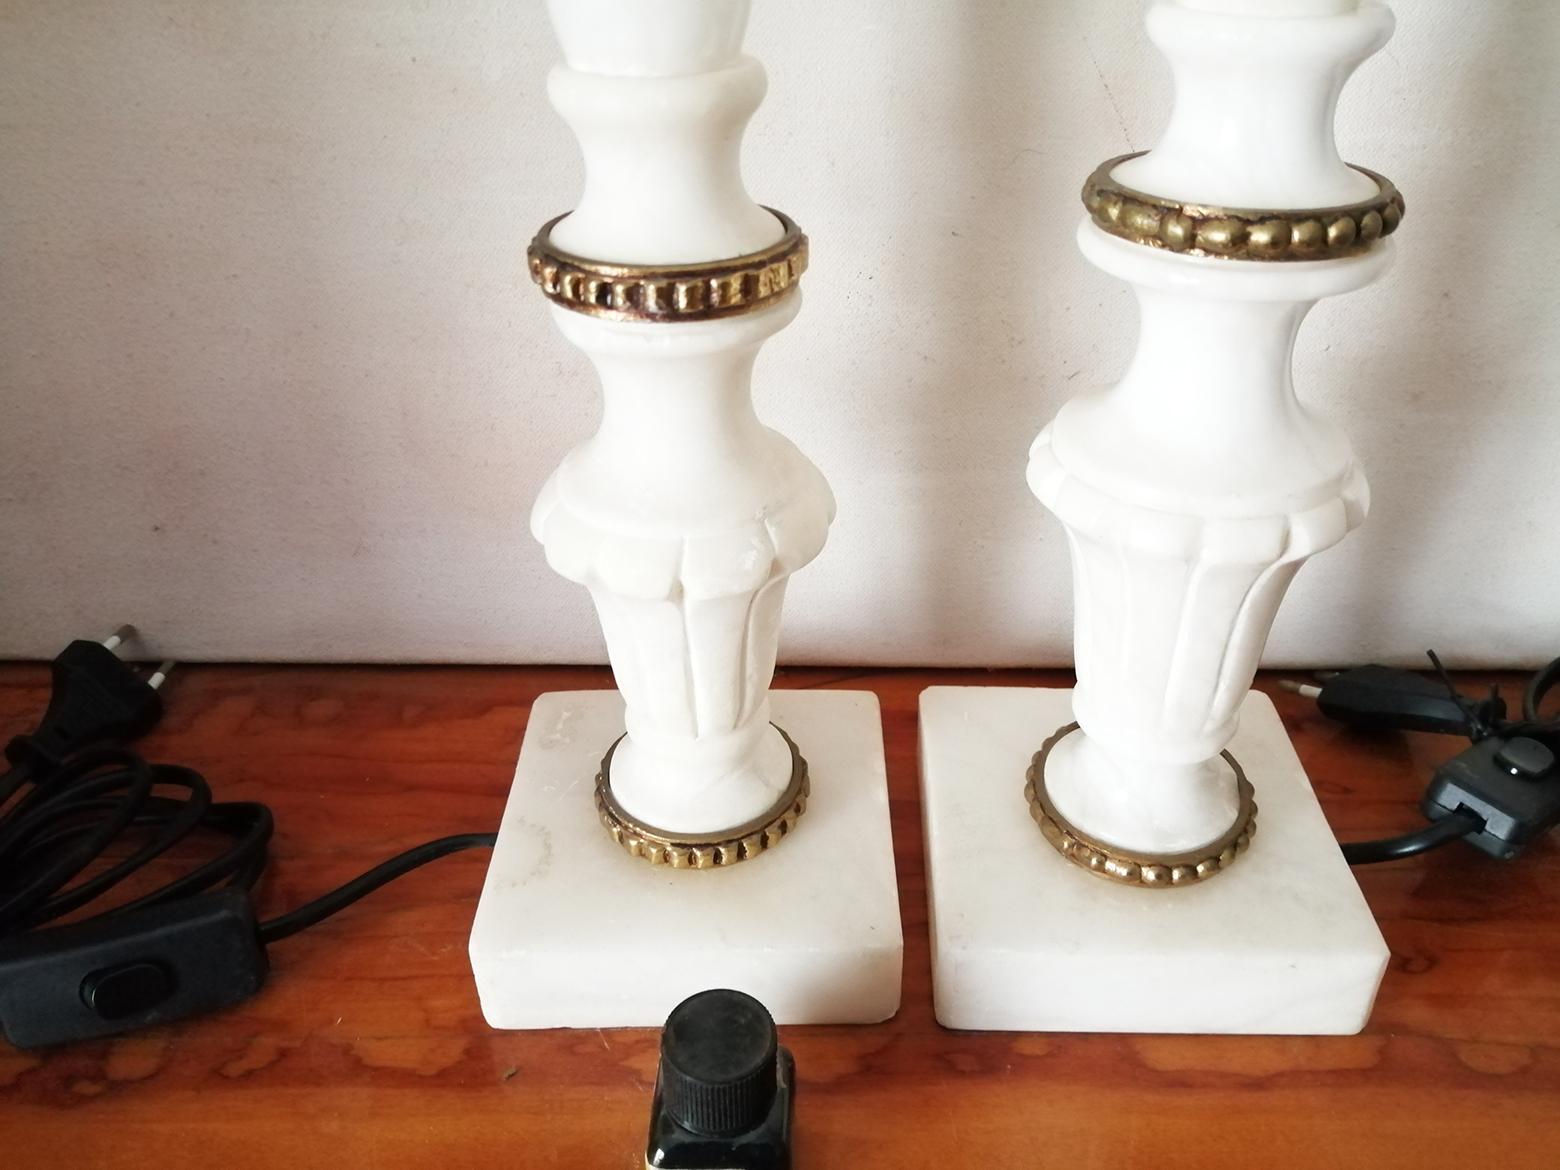 New wiring
Large table lamps in pure white natural alabaster or marble and bronze.
They are large in size, suitable to place on a side table in the living room or on a nightstand

It is in great condition. like new
Never used, .
Beautiful pair of 